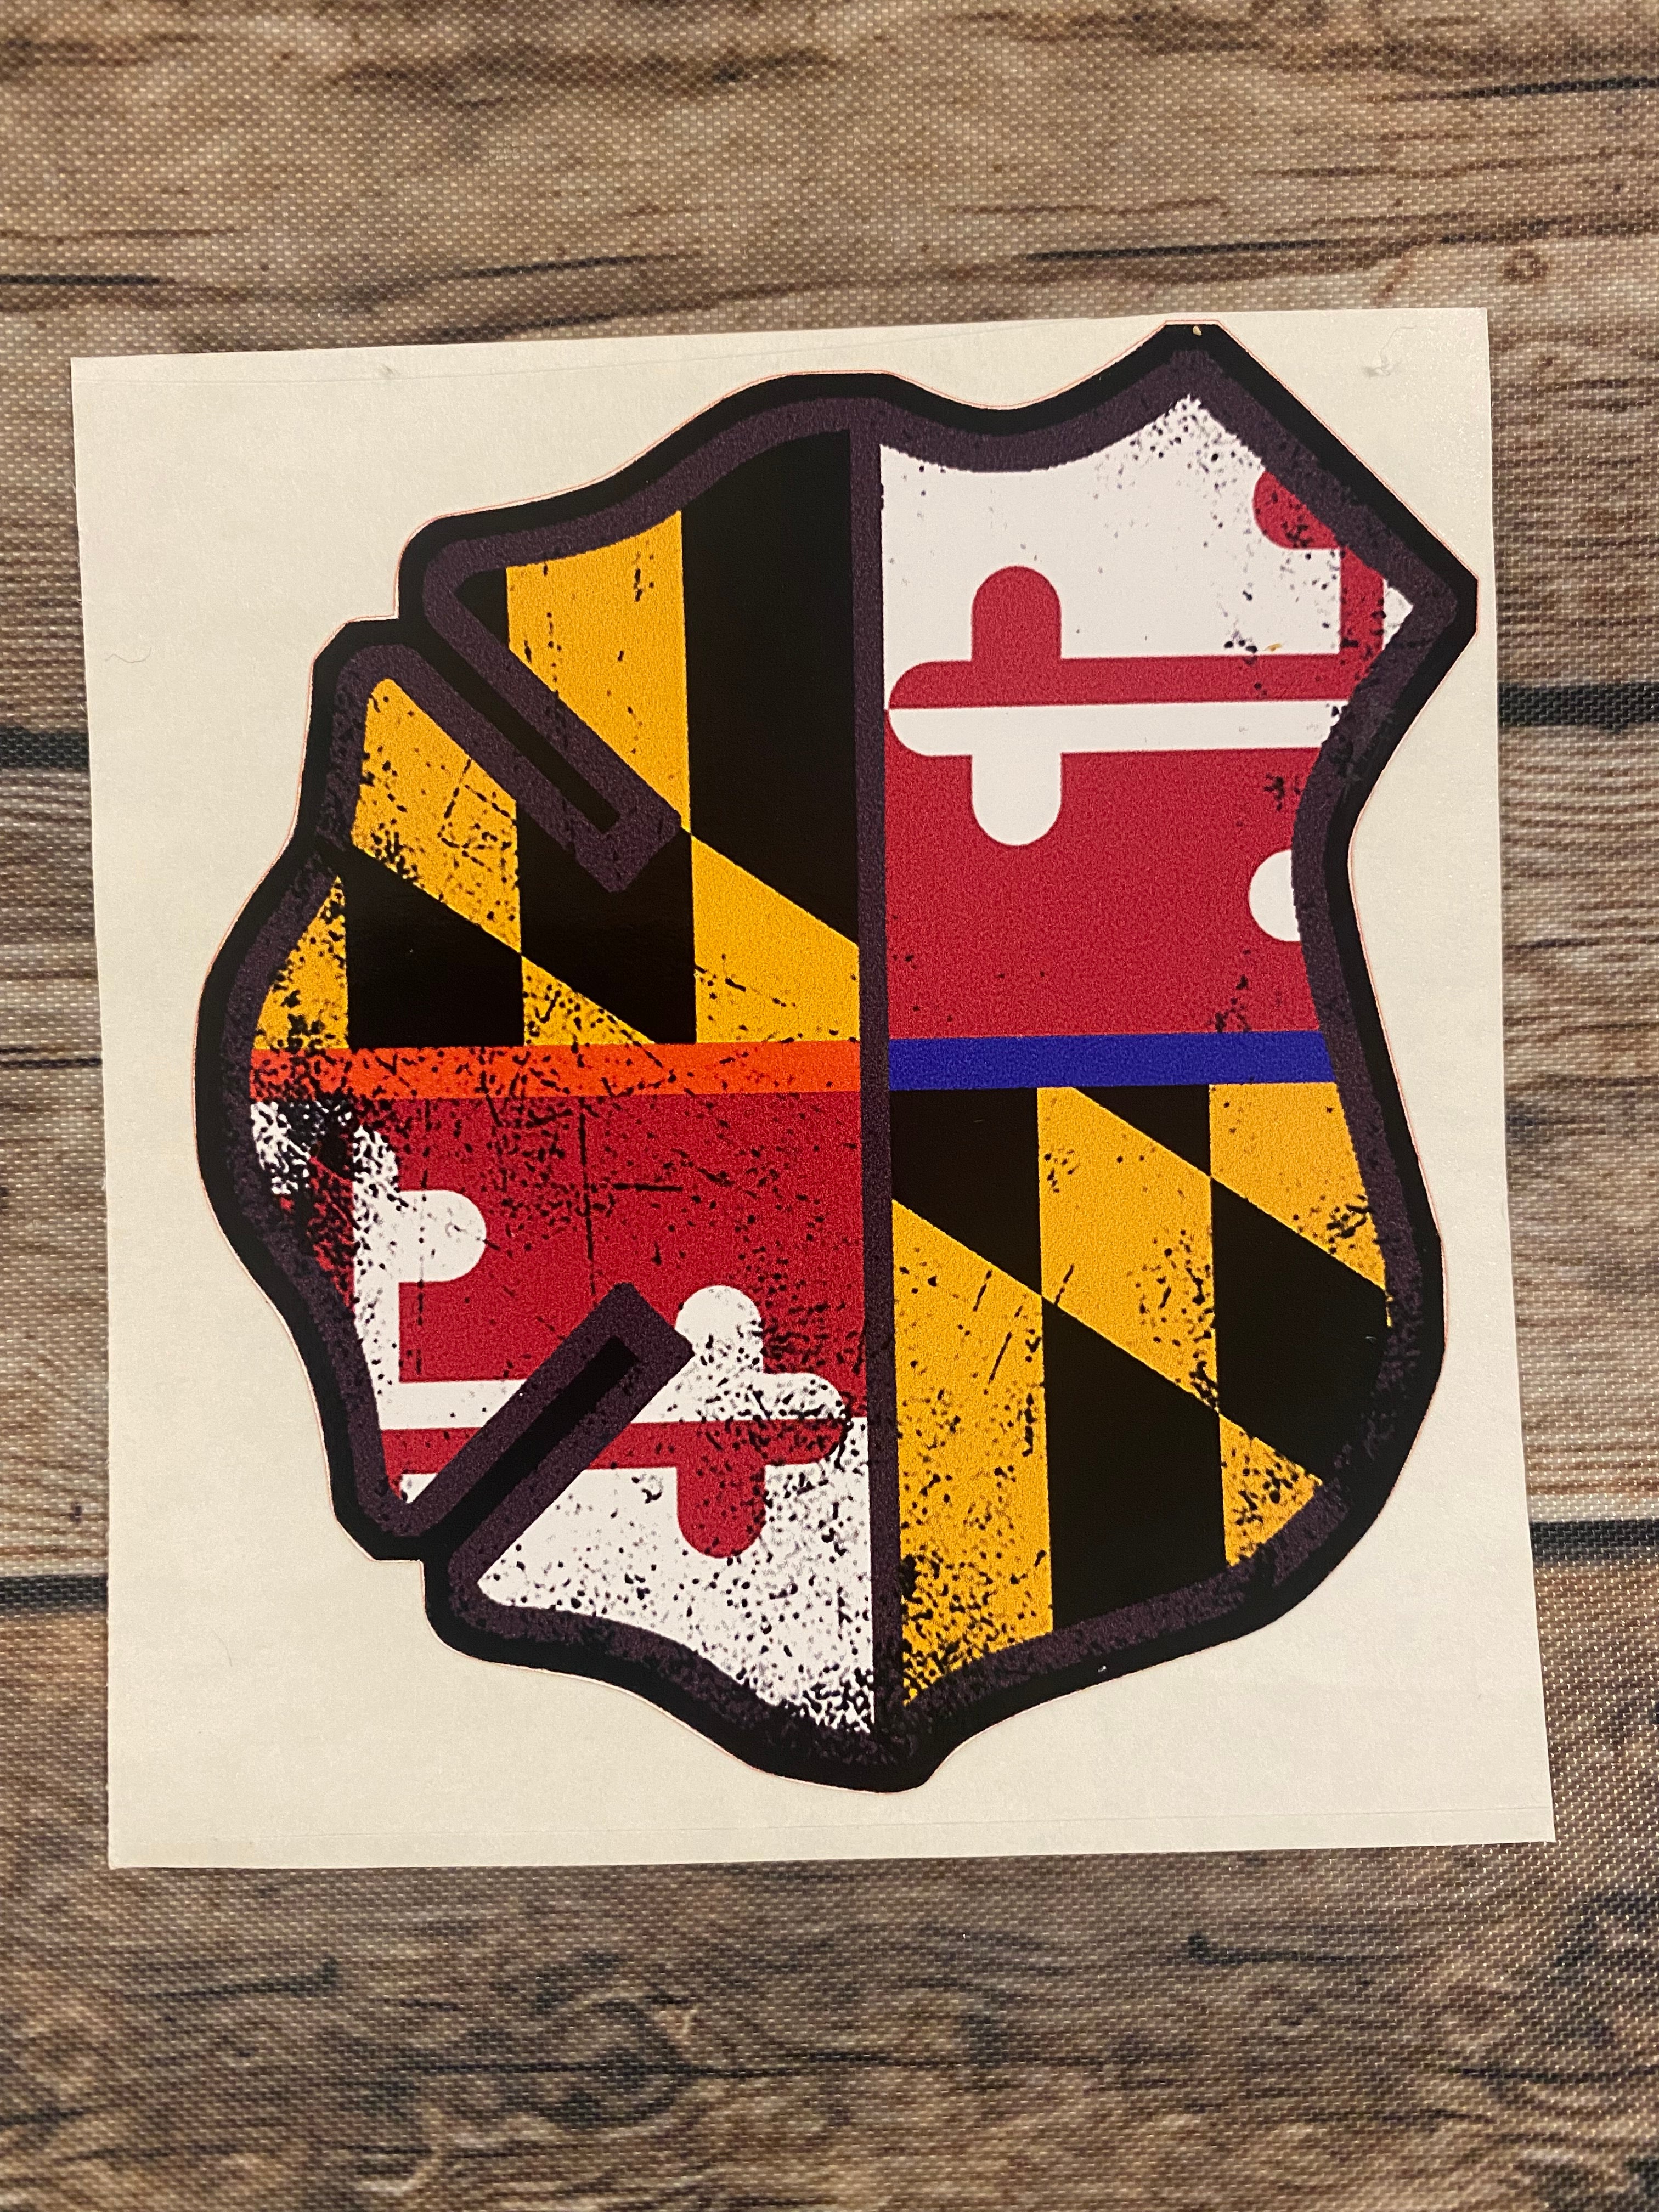 Maryland Police and Firefighter Badge Sticker